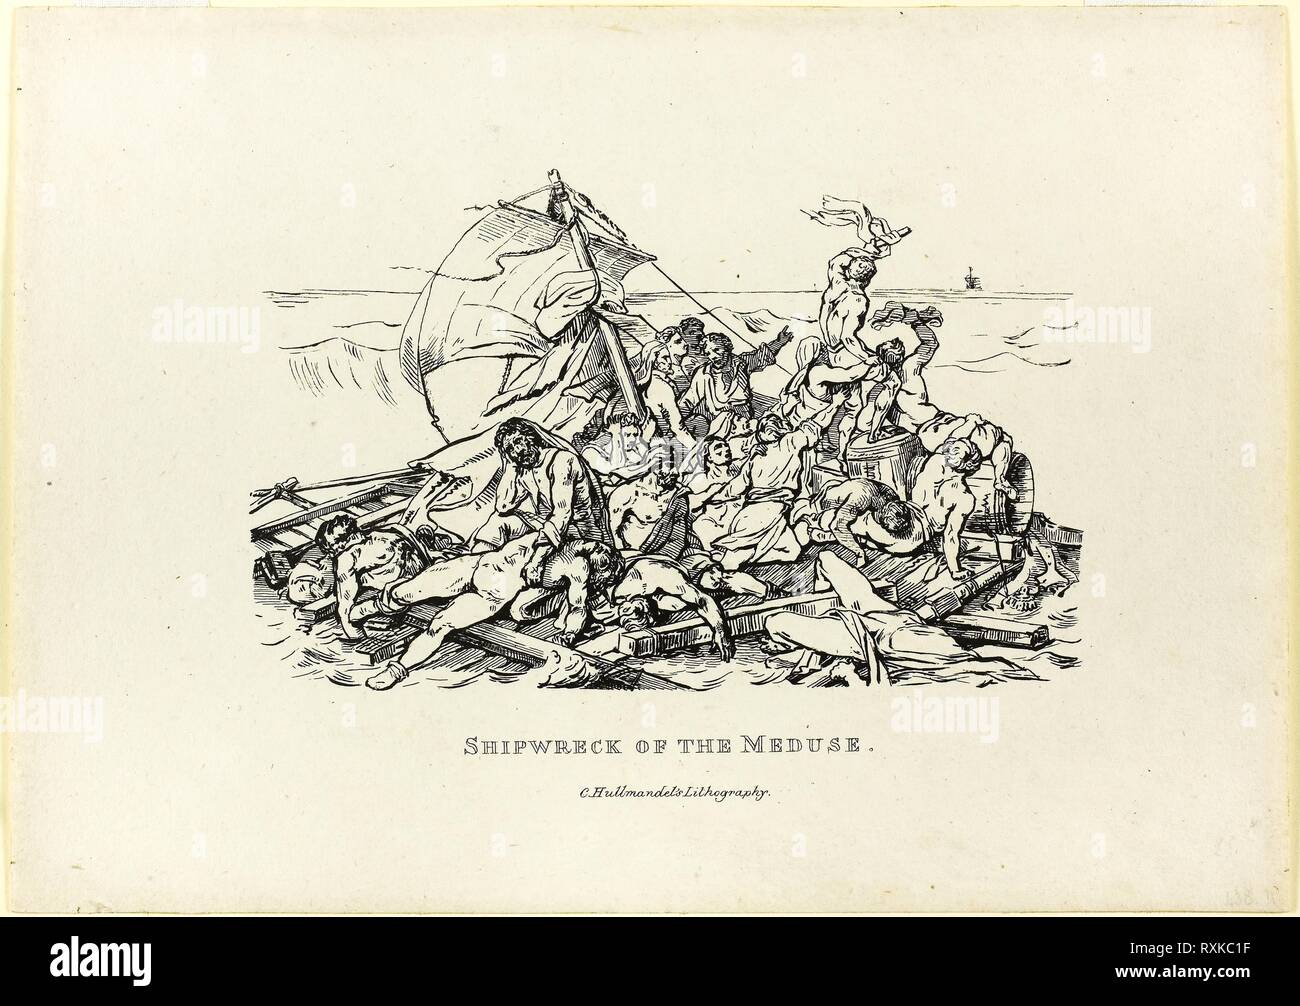 Shipwreck of the Medusa. Jean Louis André Théodore Géricault (French, 1791-1824) and Nicolas Toussaint Charlet (French, 1792-1845); printed by Charles Joseph Hullmandel (German and English, 1789-1850). Date: 1820. Dimensions: 100 × 159 mm (image); 174 × 244 mm (sheet). Pen lithograph in black on ivory wove paper. Origin: France. Museum: The Chicago Art Institute. Author: Jean Louis André Théodore Géricault. Théodore Gericault and Nicolas-Toussaint Charlet. Stock Photo